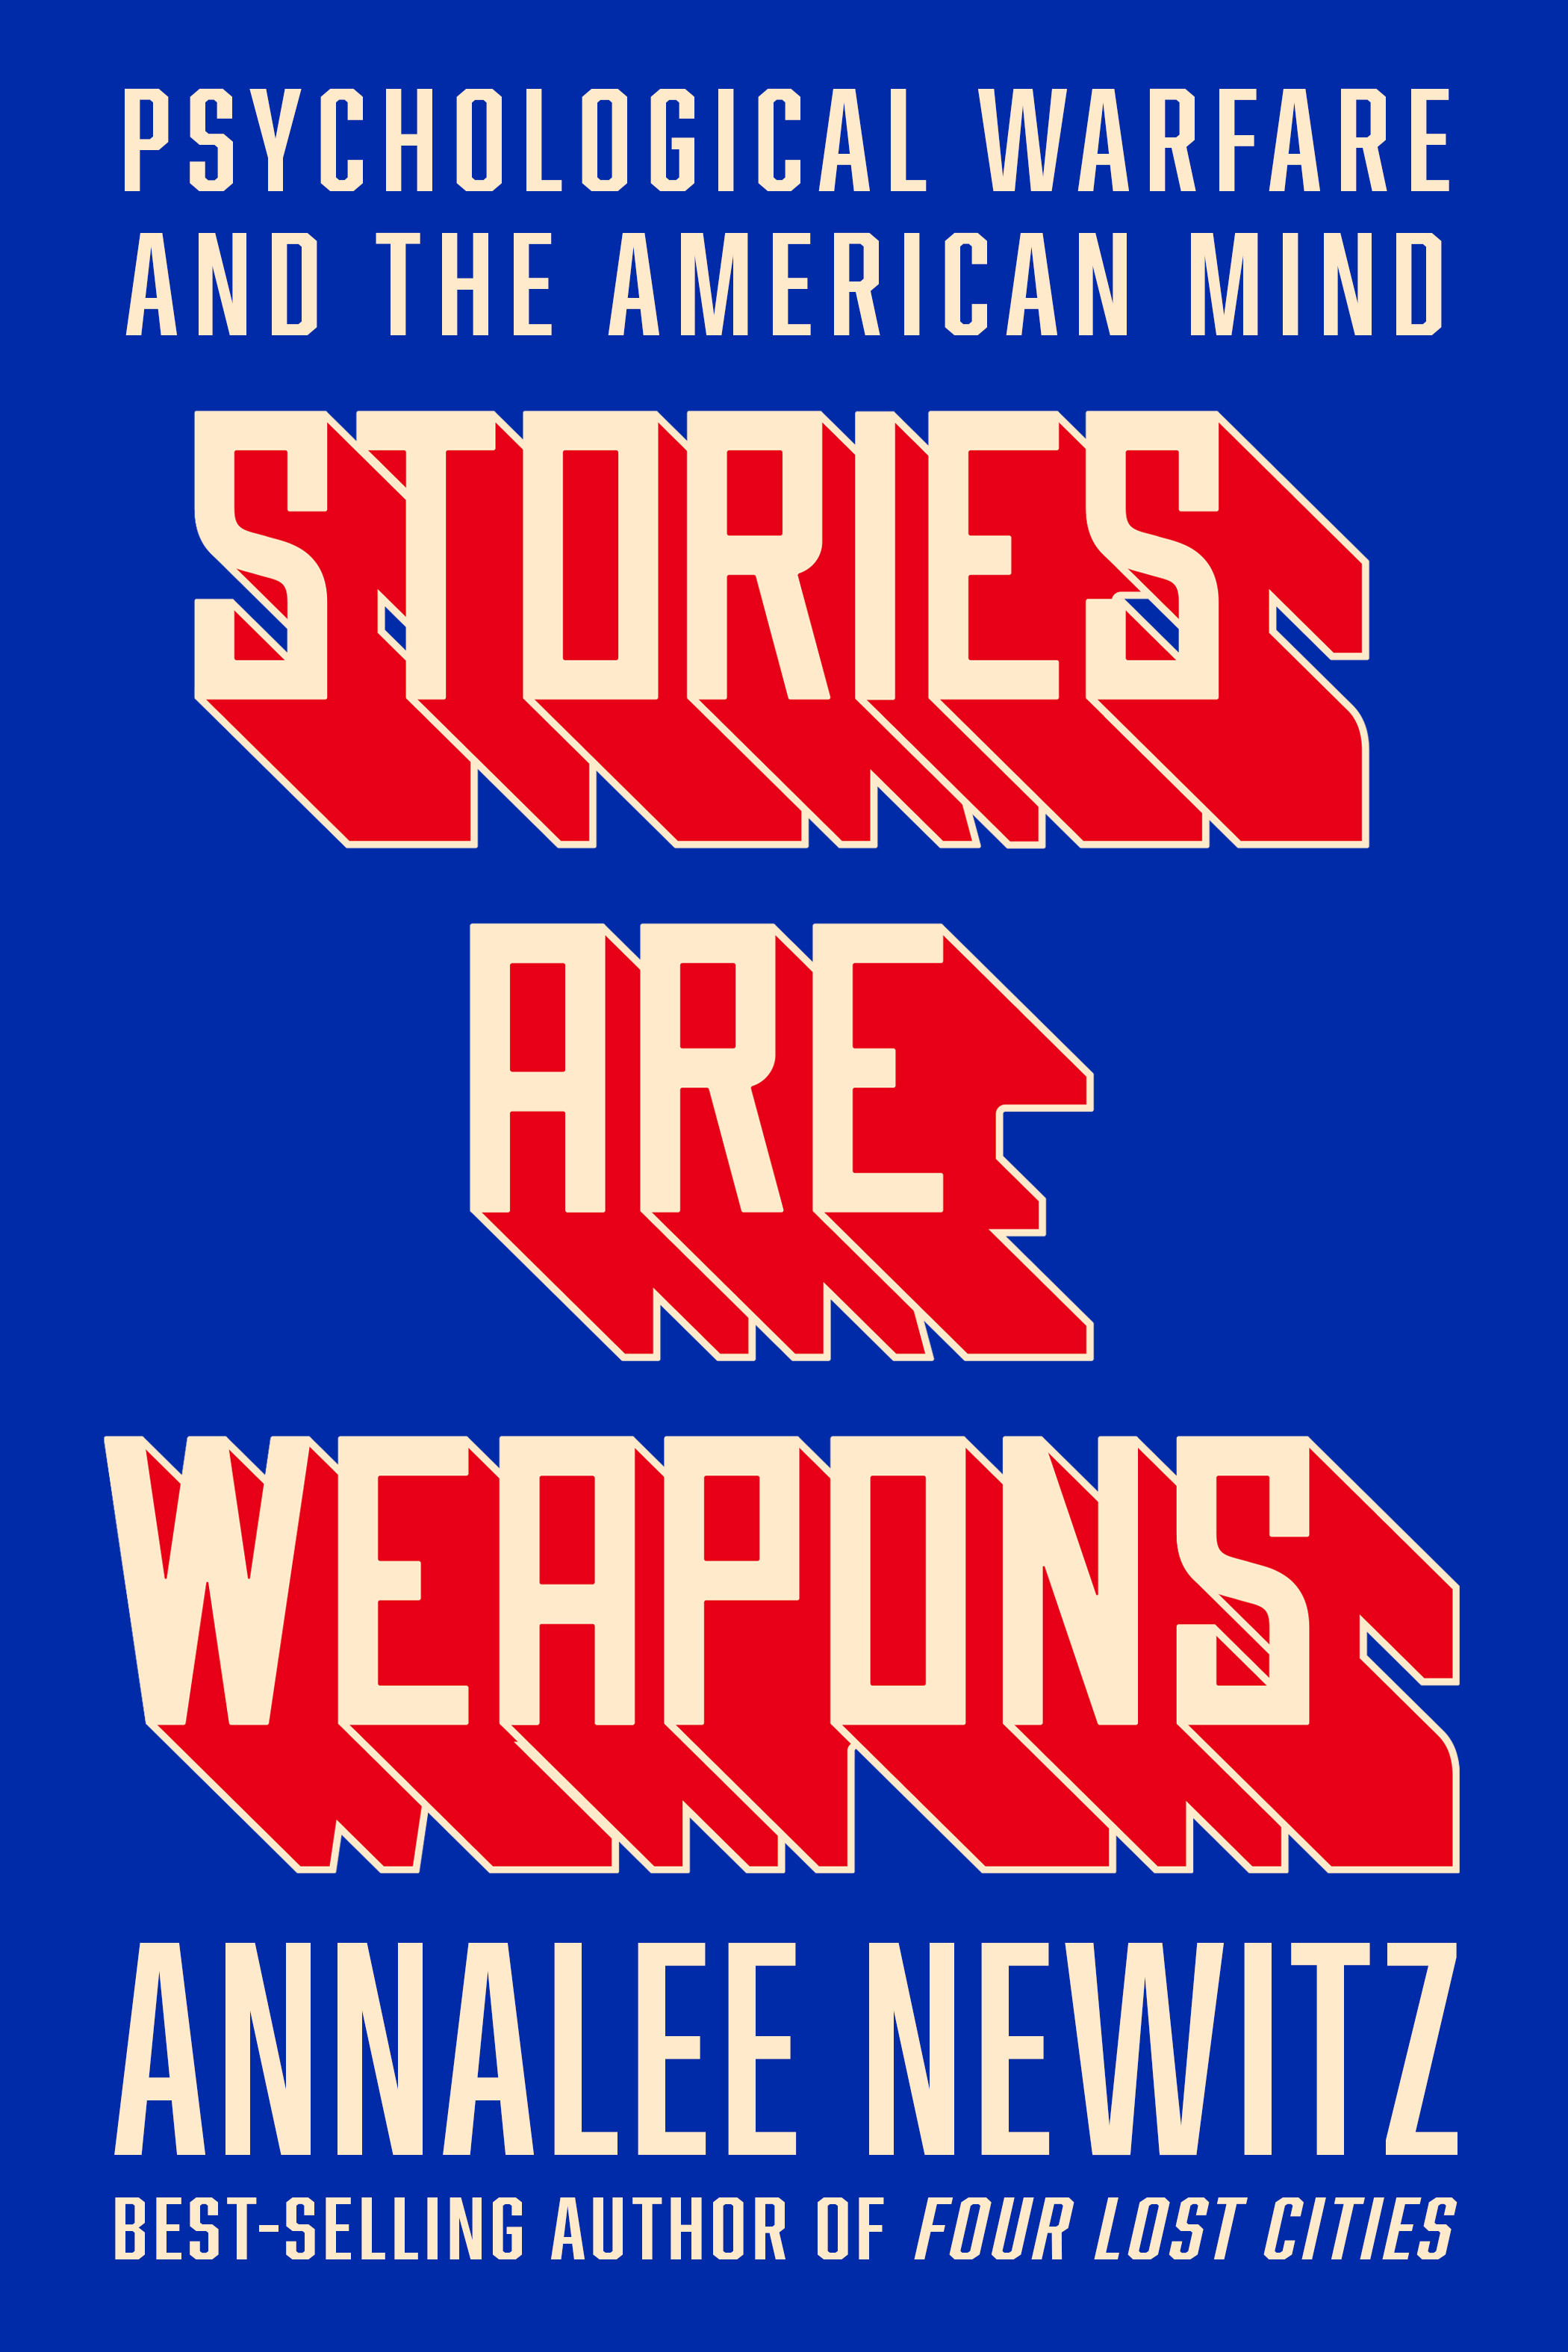 Annalee Newitz: Stories Are Weapons: Psychological Warfare and the American Mind (W.W. Norton.)